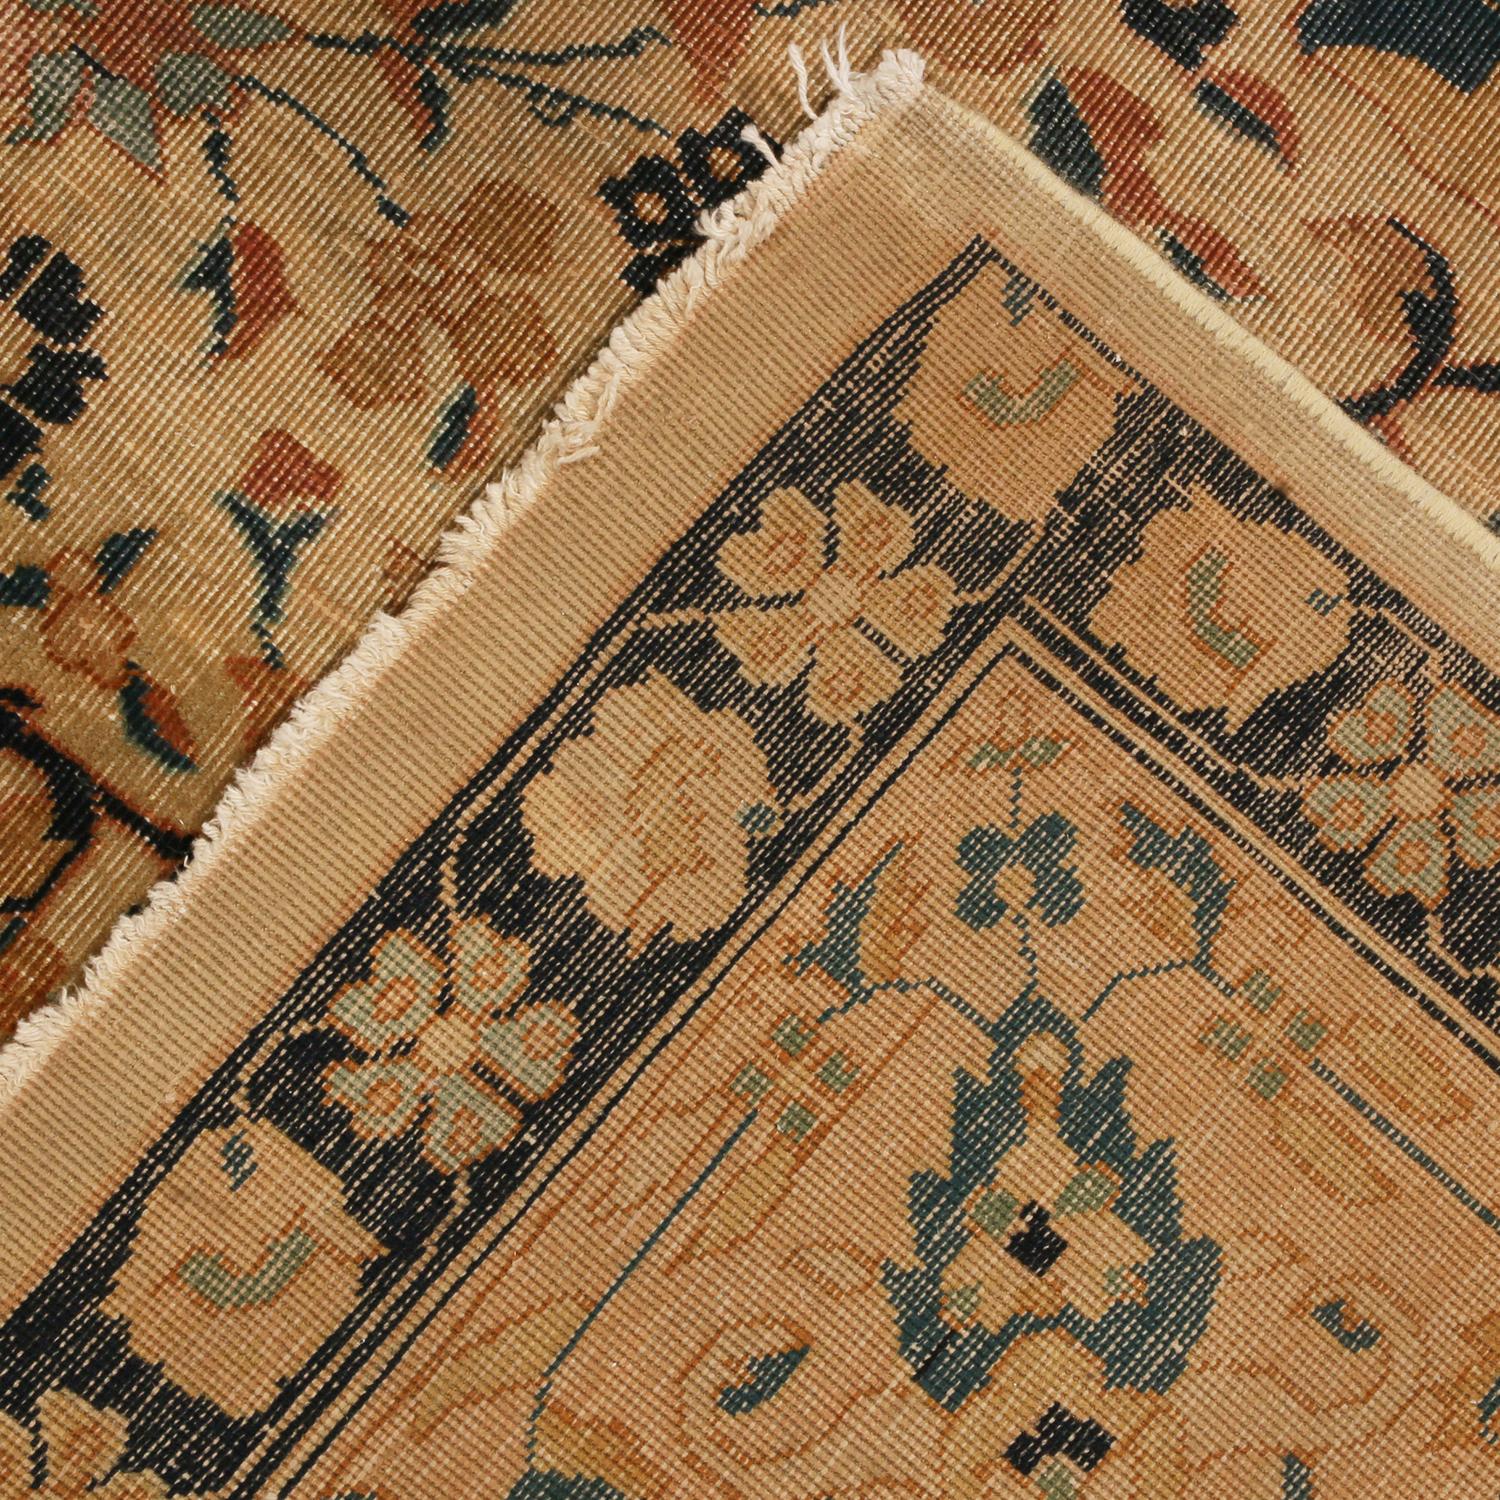 Early 20th Century Antique Tabriz Golden-Brown Wool Rug with Blue Accents by Rug & Kilim For Sale